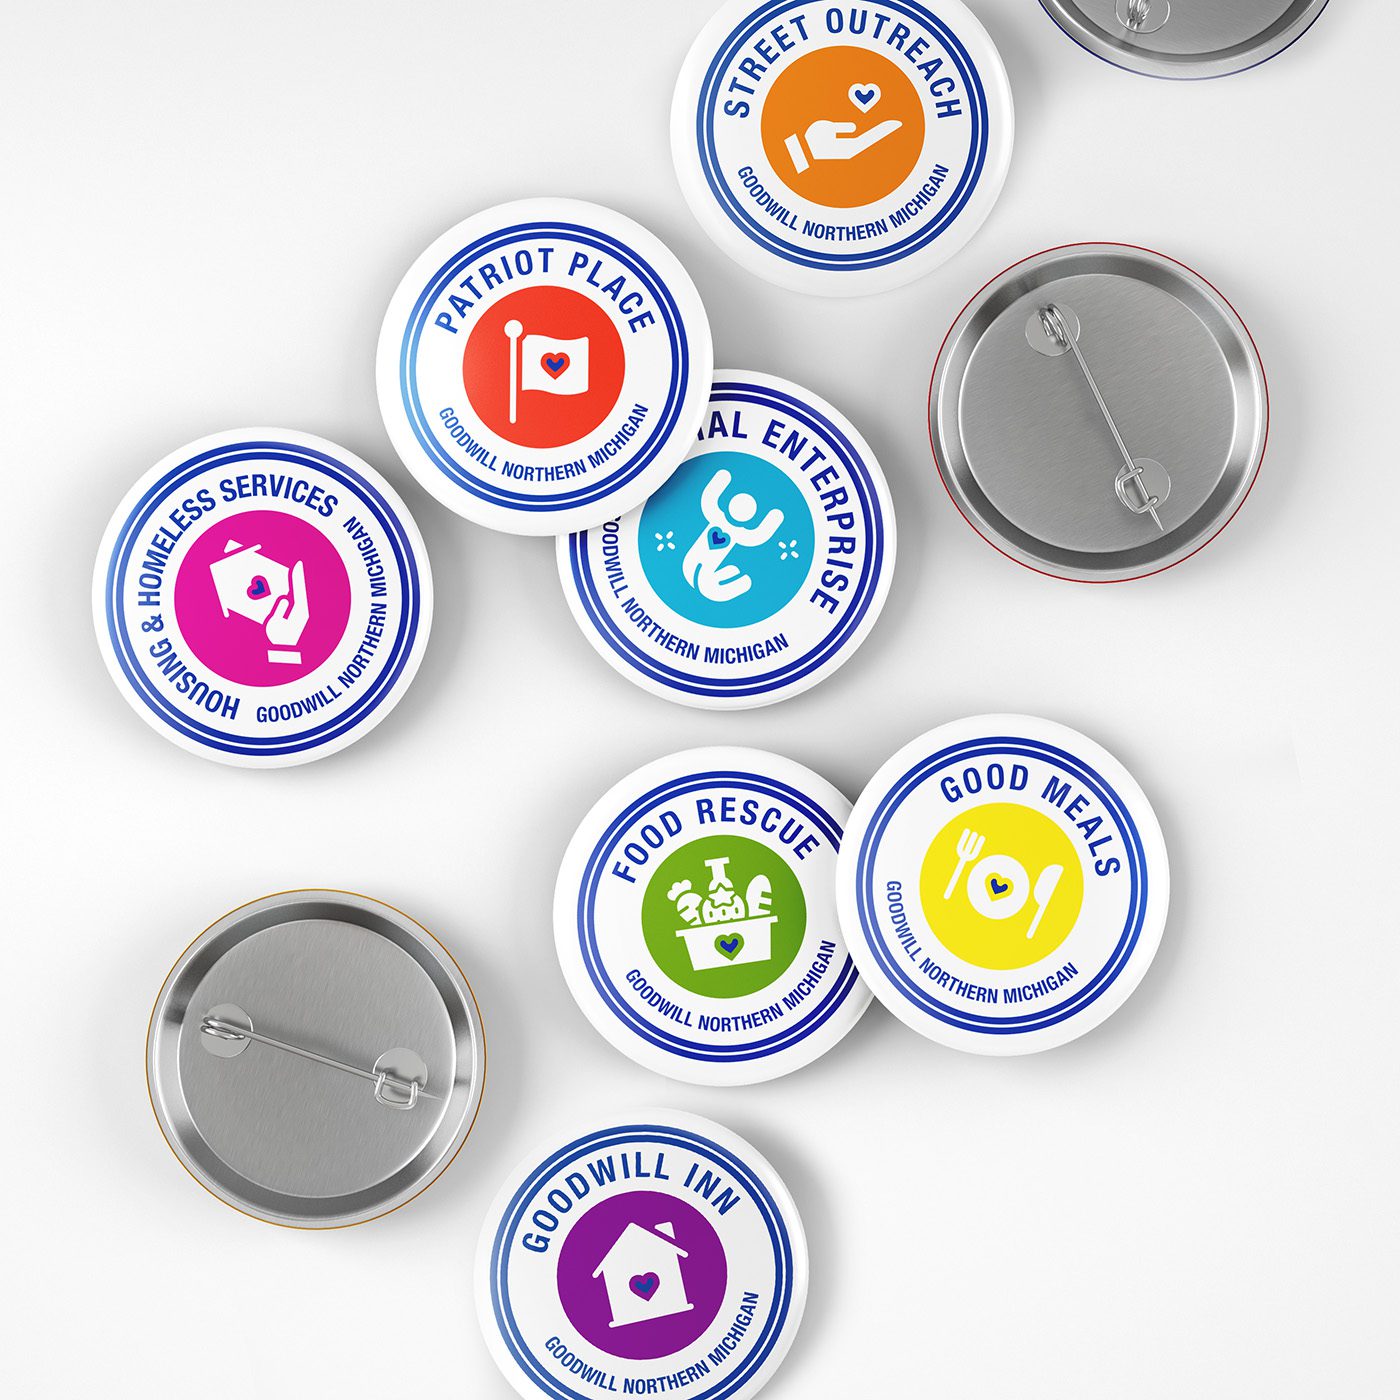 small button badges designed to represent the individual programs of GoodwillNMI